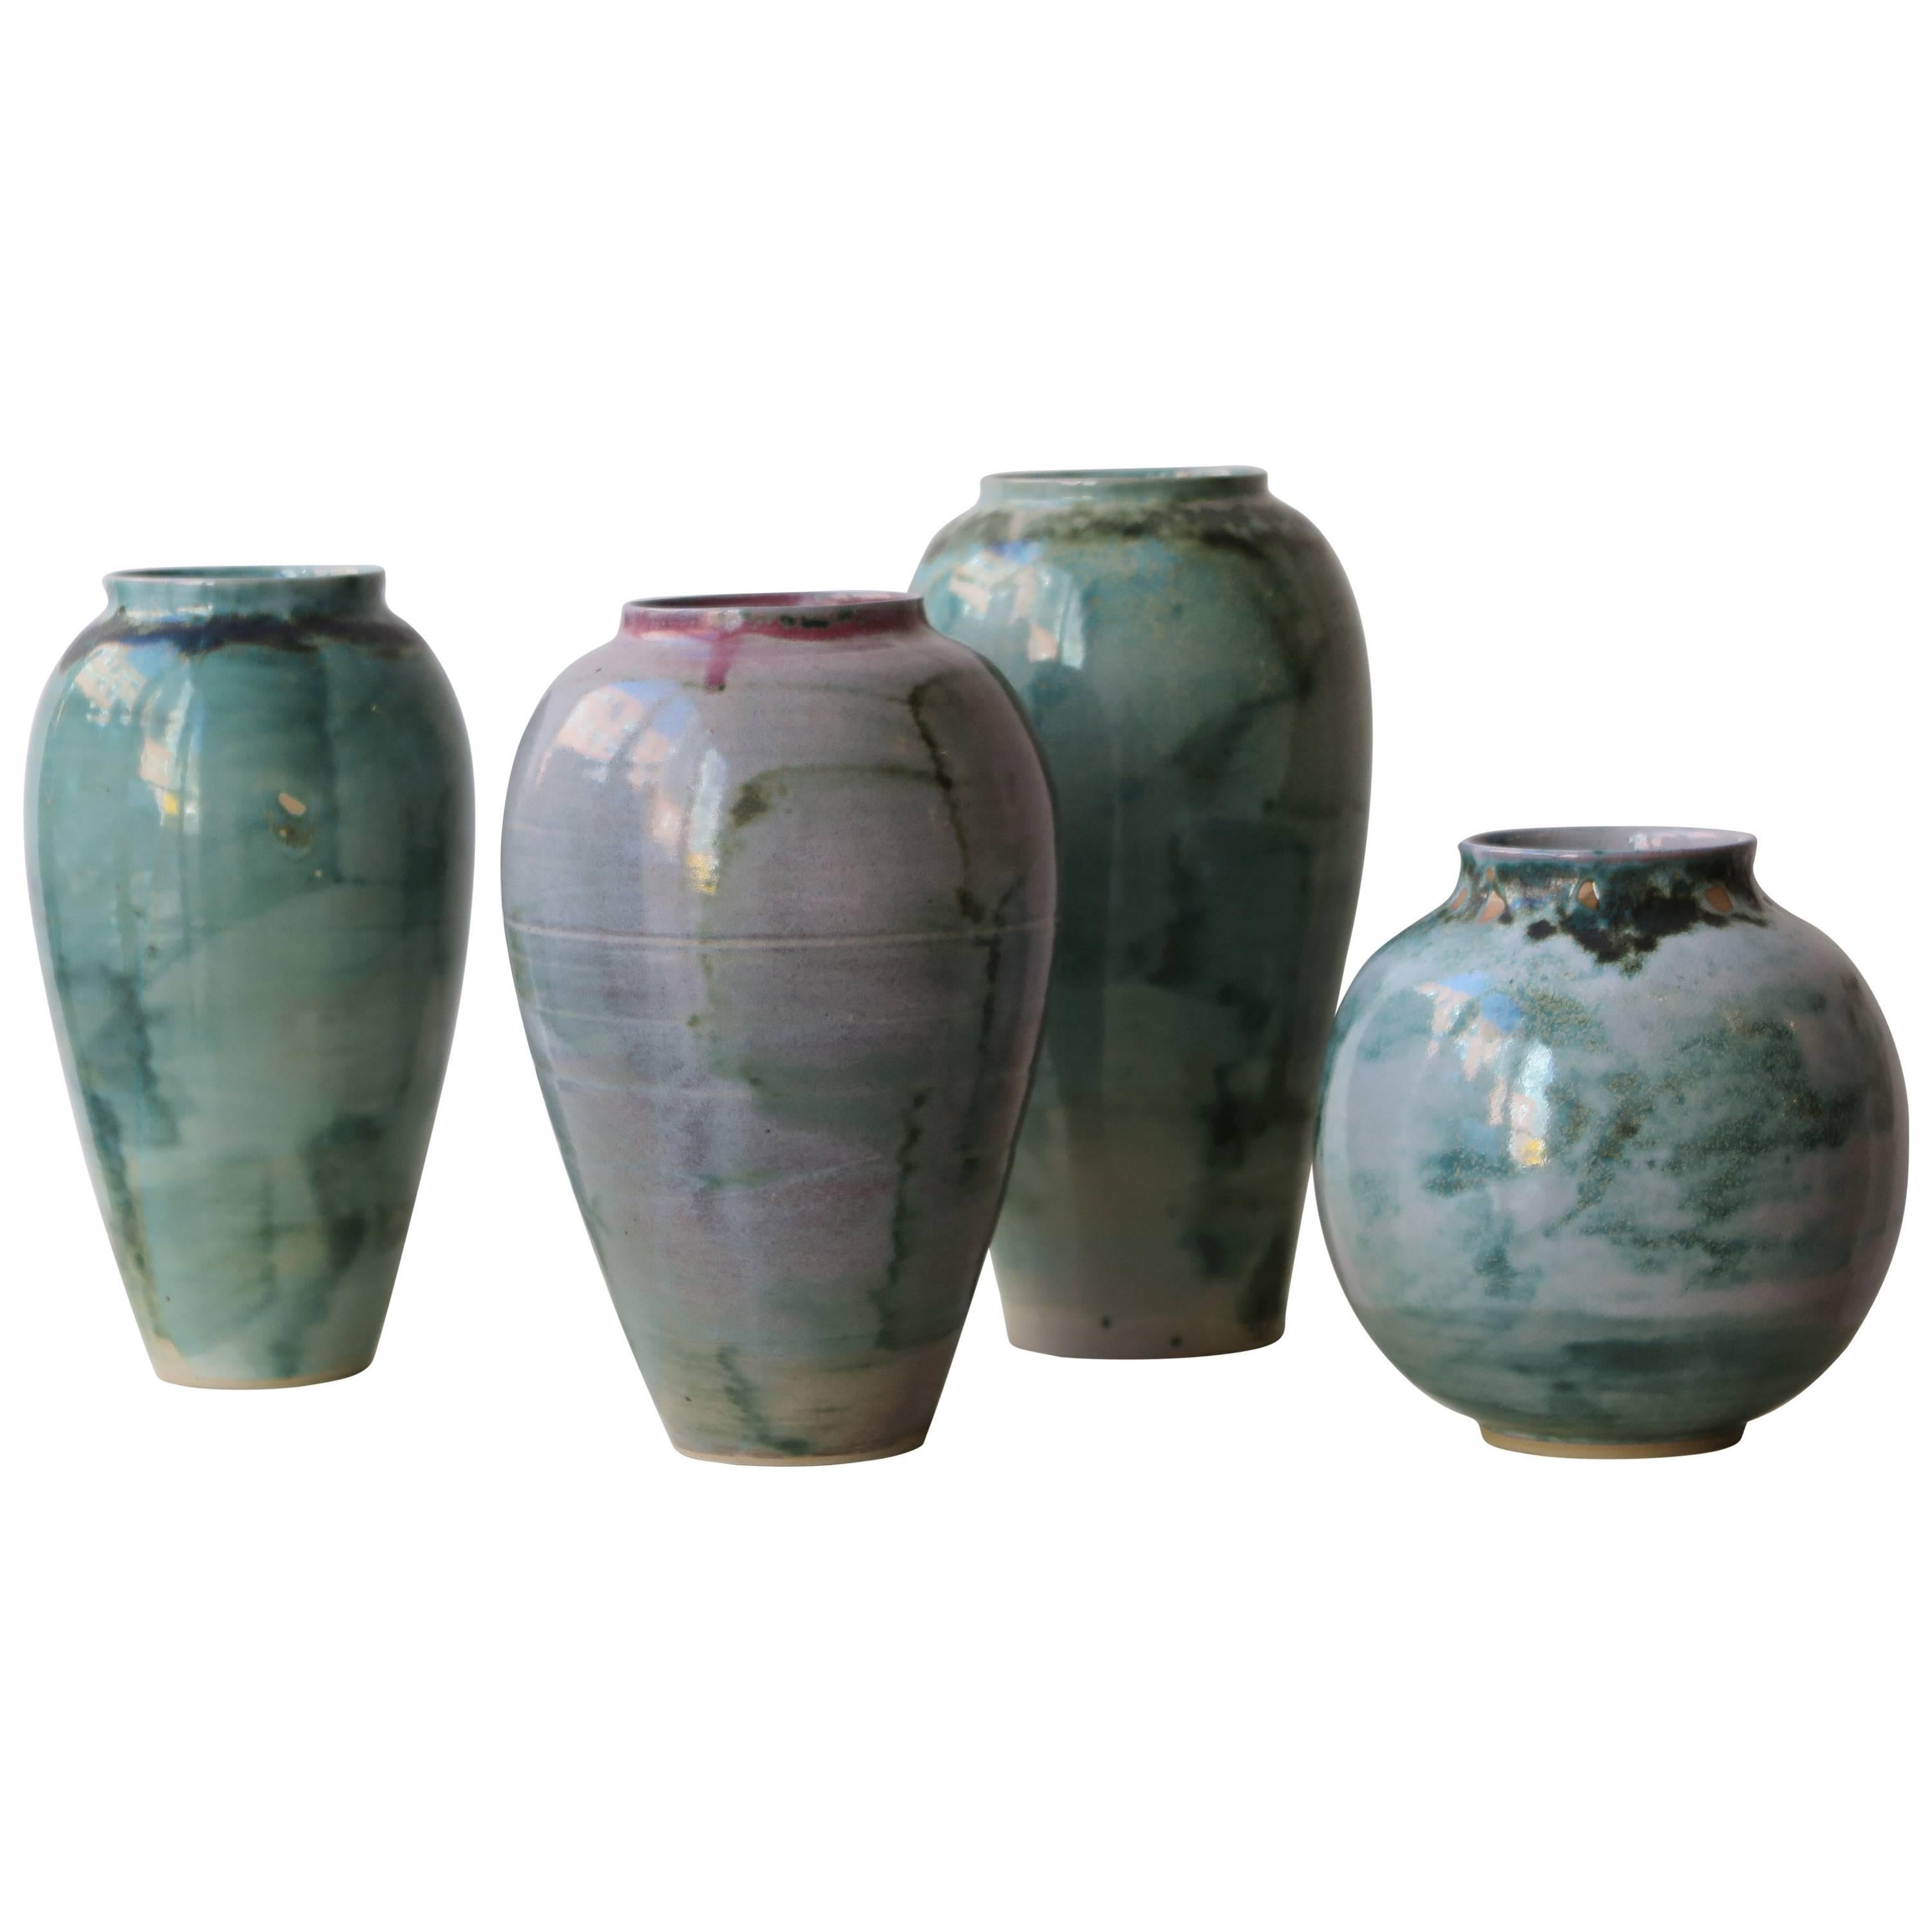 Collection of Vases by Christiane Perrochon